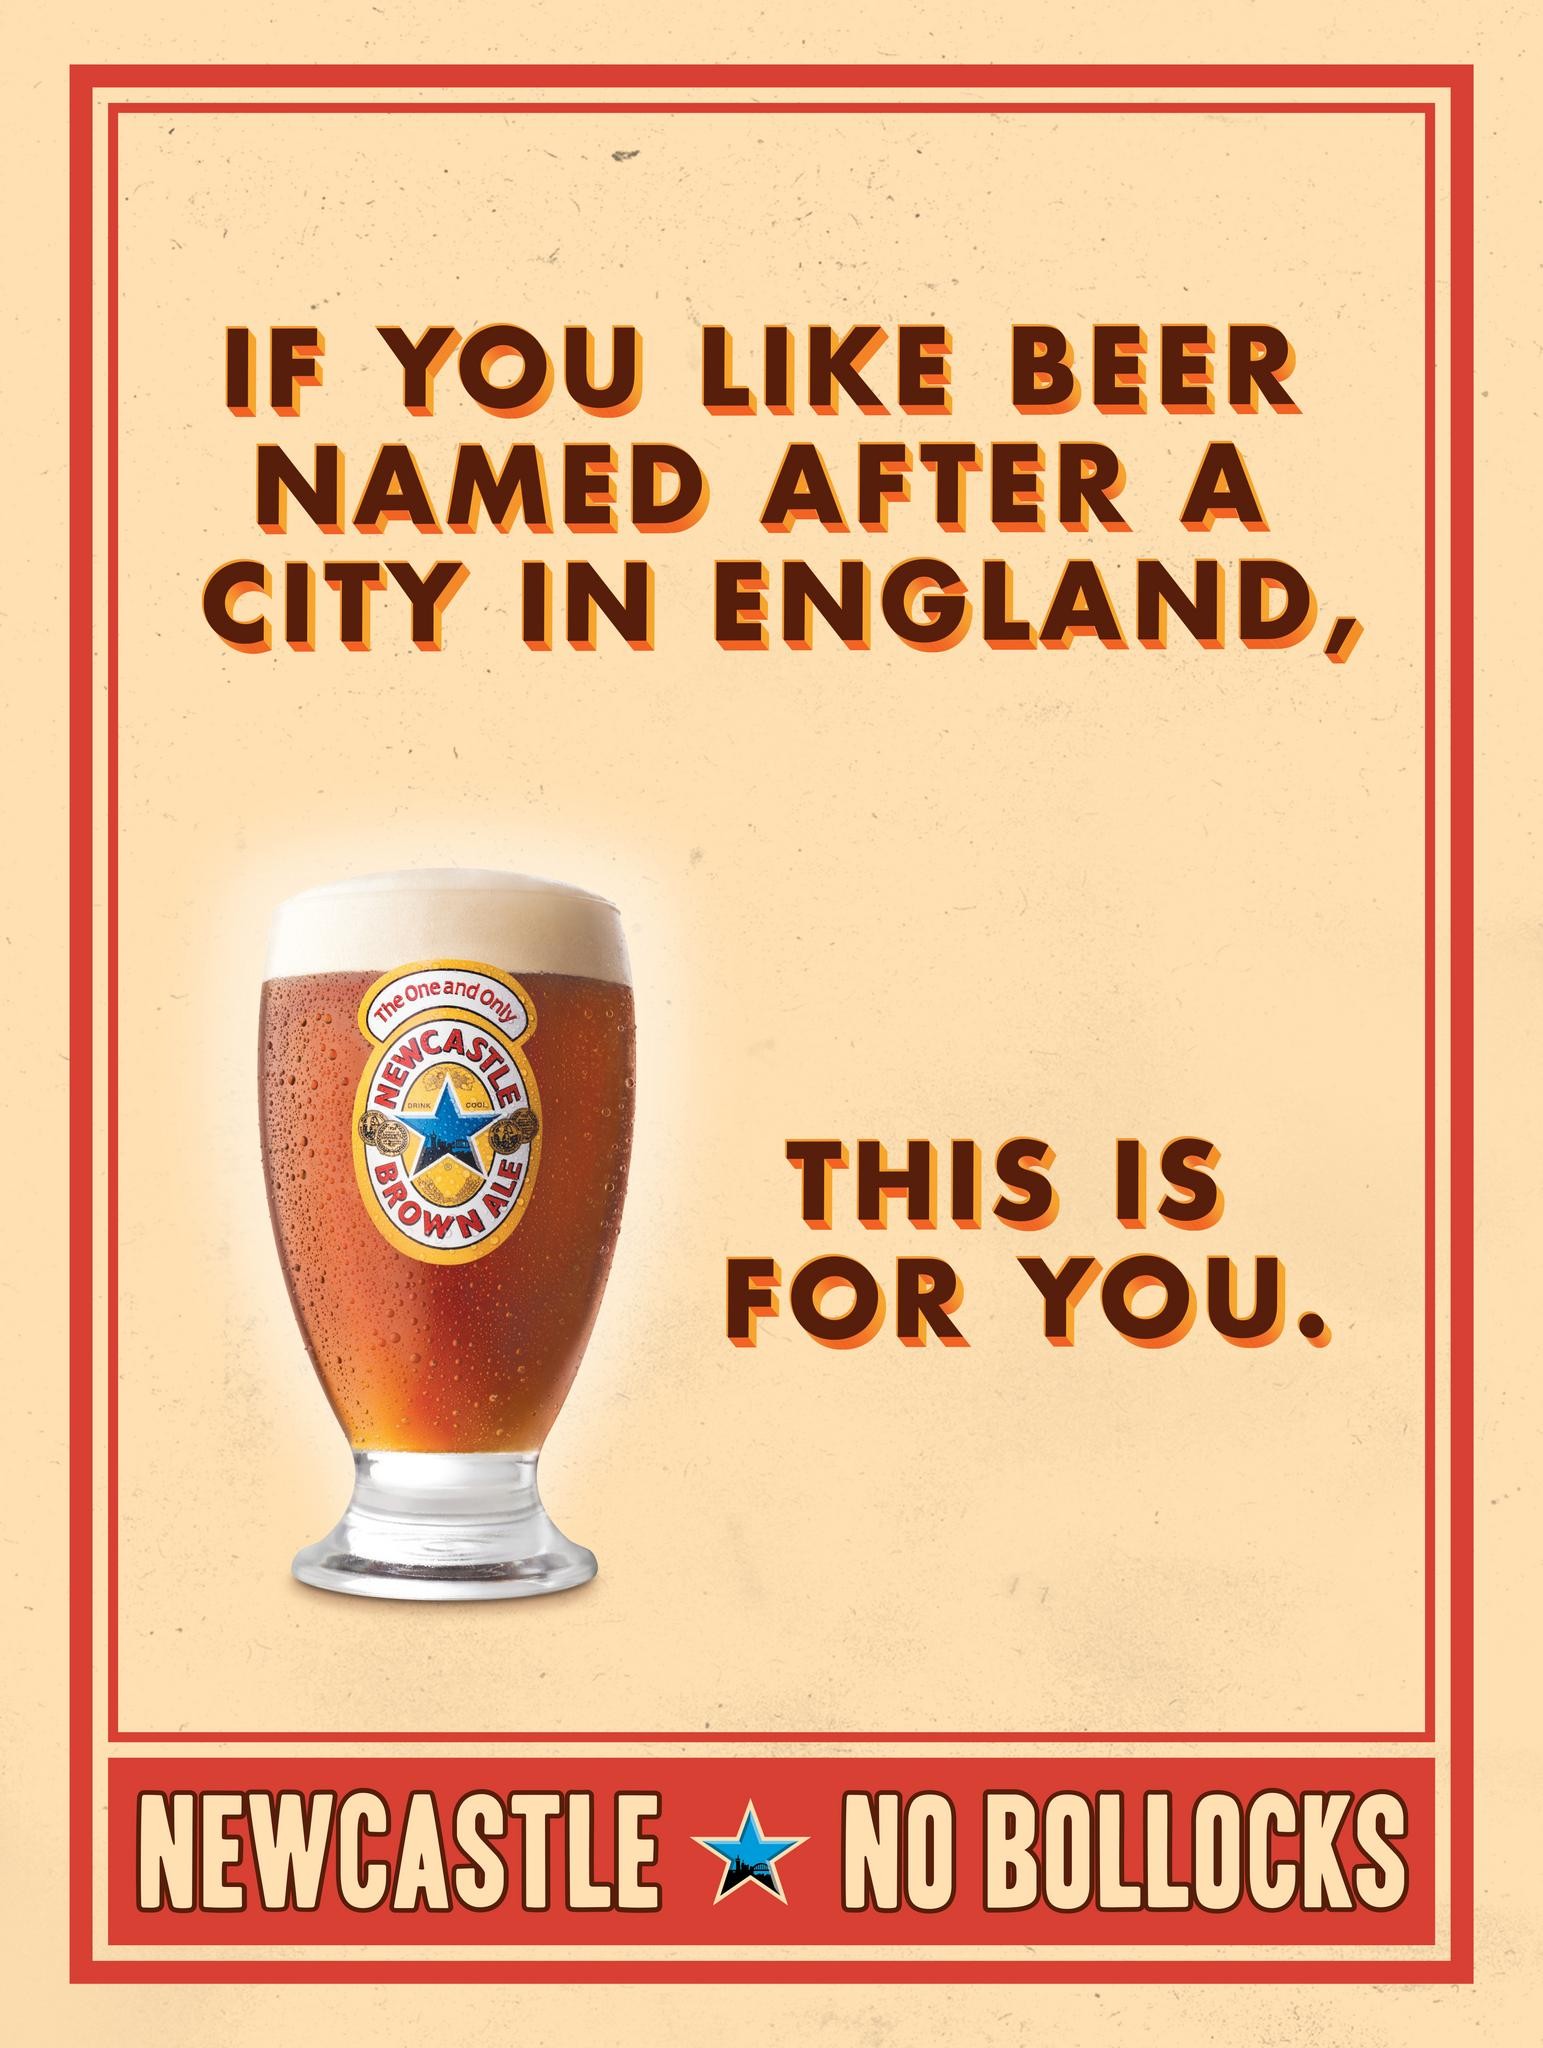 IF YOU LIKE BEER NAMED AFTER A CITY IN ENGLAND, THIS IS FOR YOU.